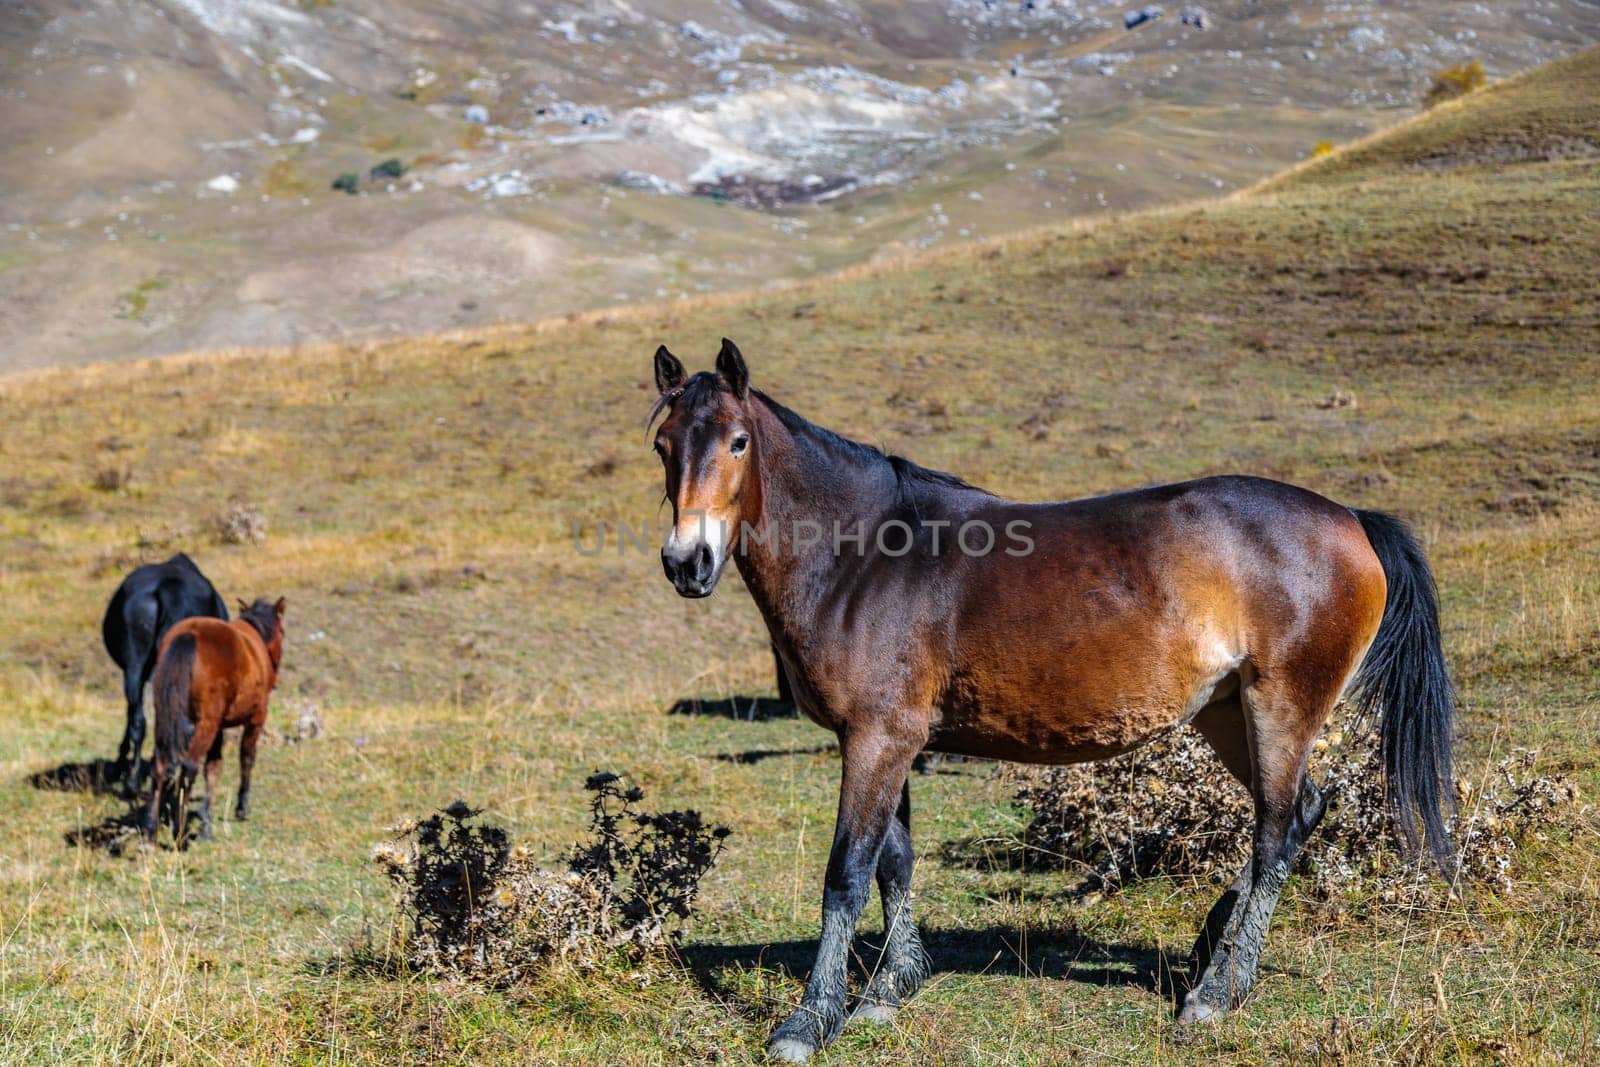 Imposing wild horses surrounded by mountain beauty, express the wild spirit of nature